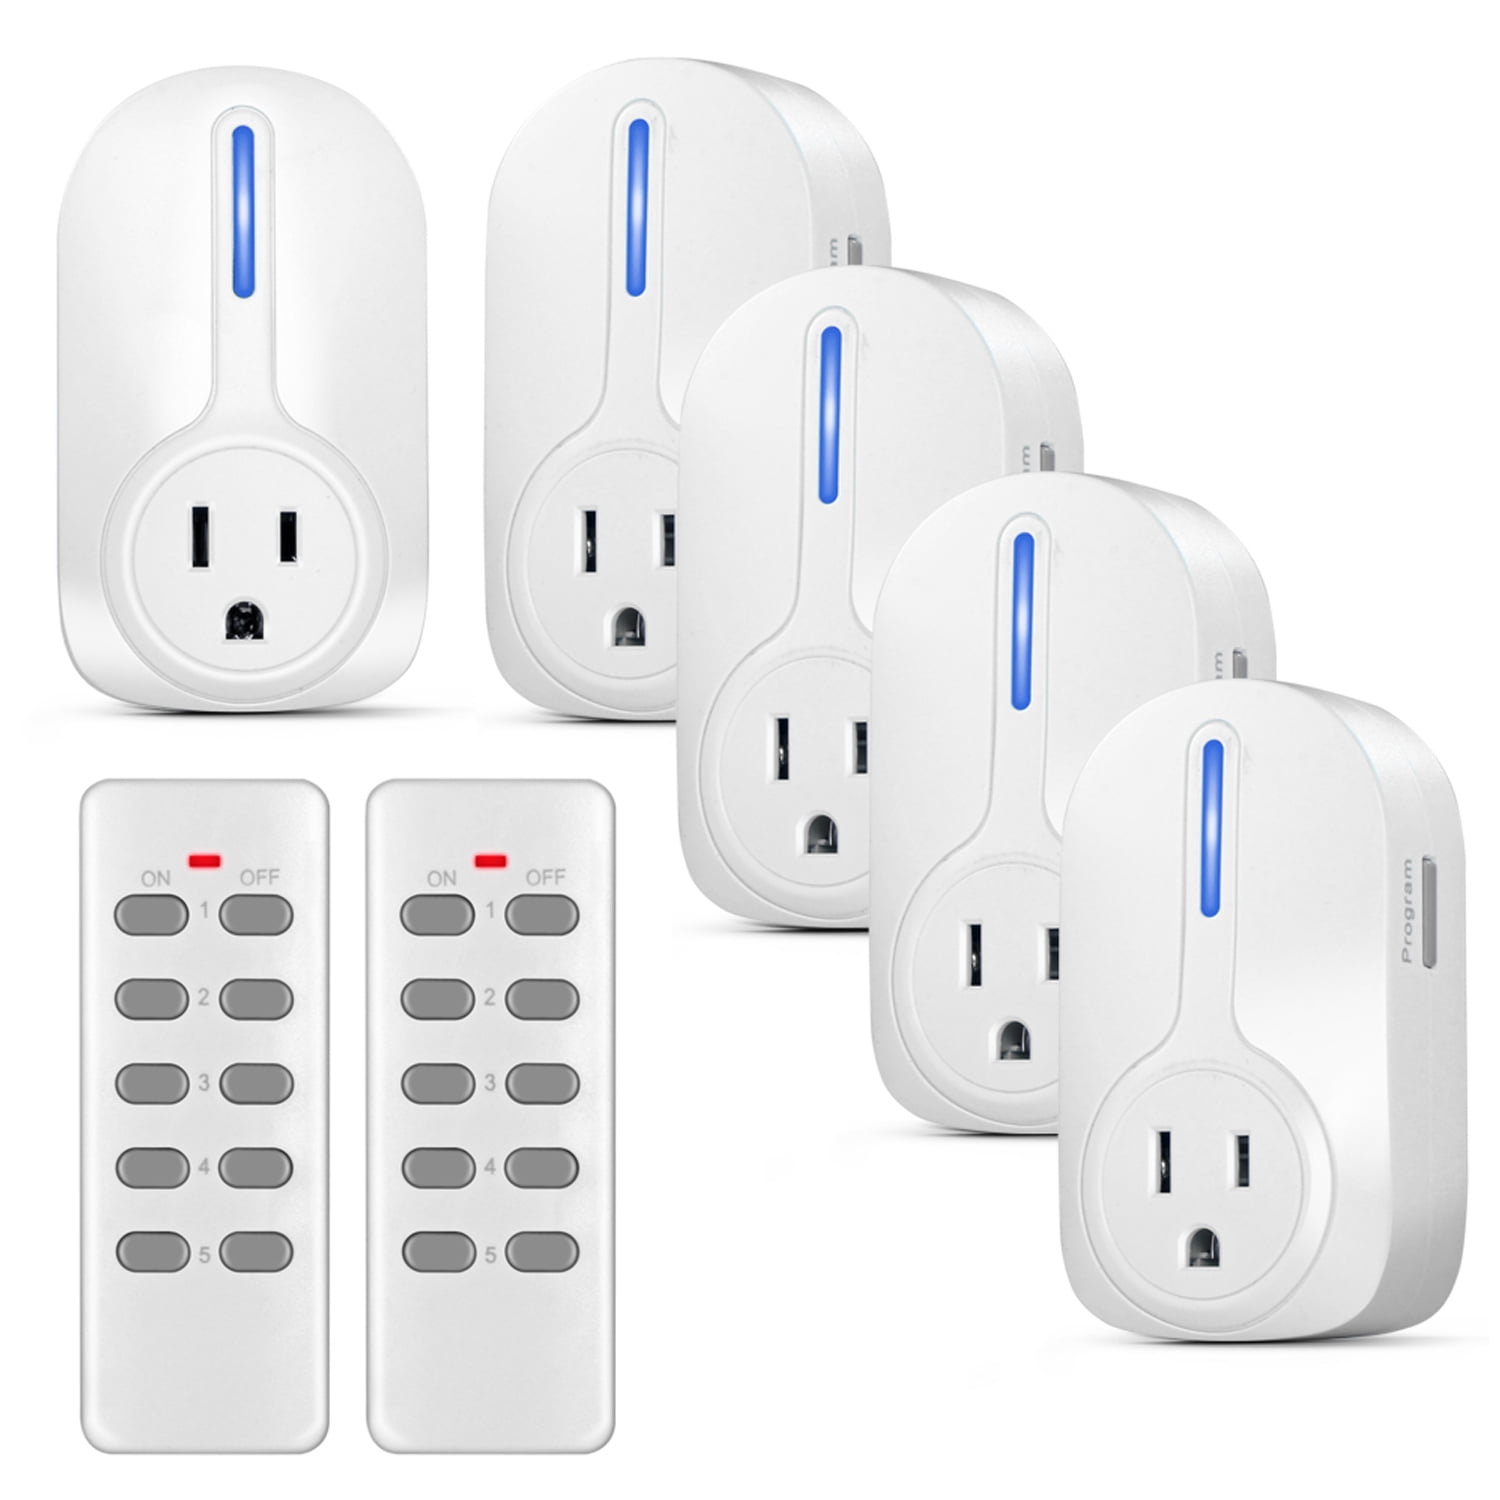 Indoor Cordless Electrical Outlet Plug With Programmable Remote Control By  Lavish Home 